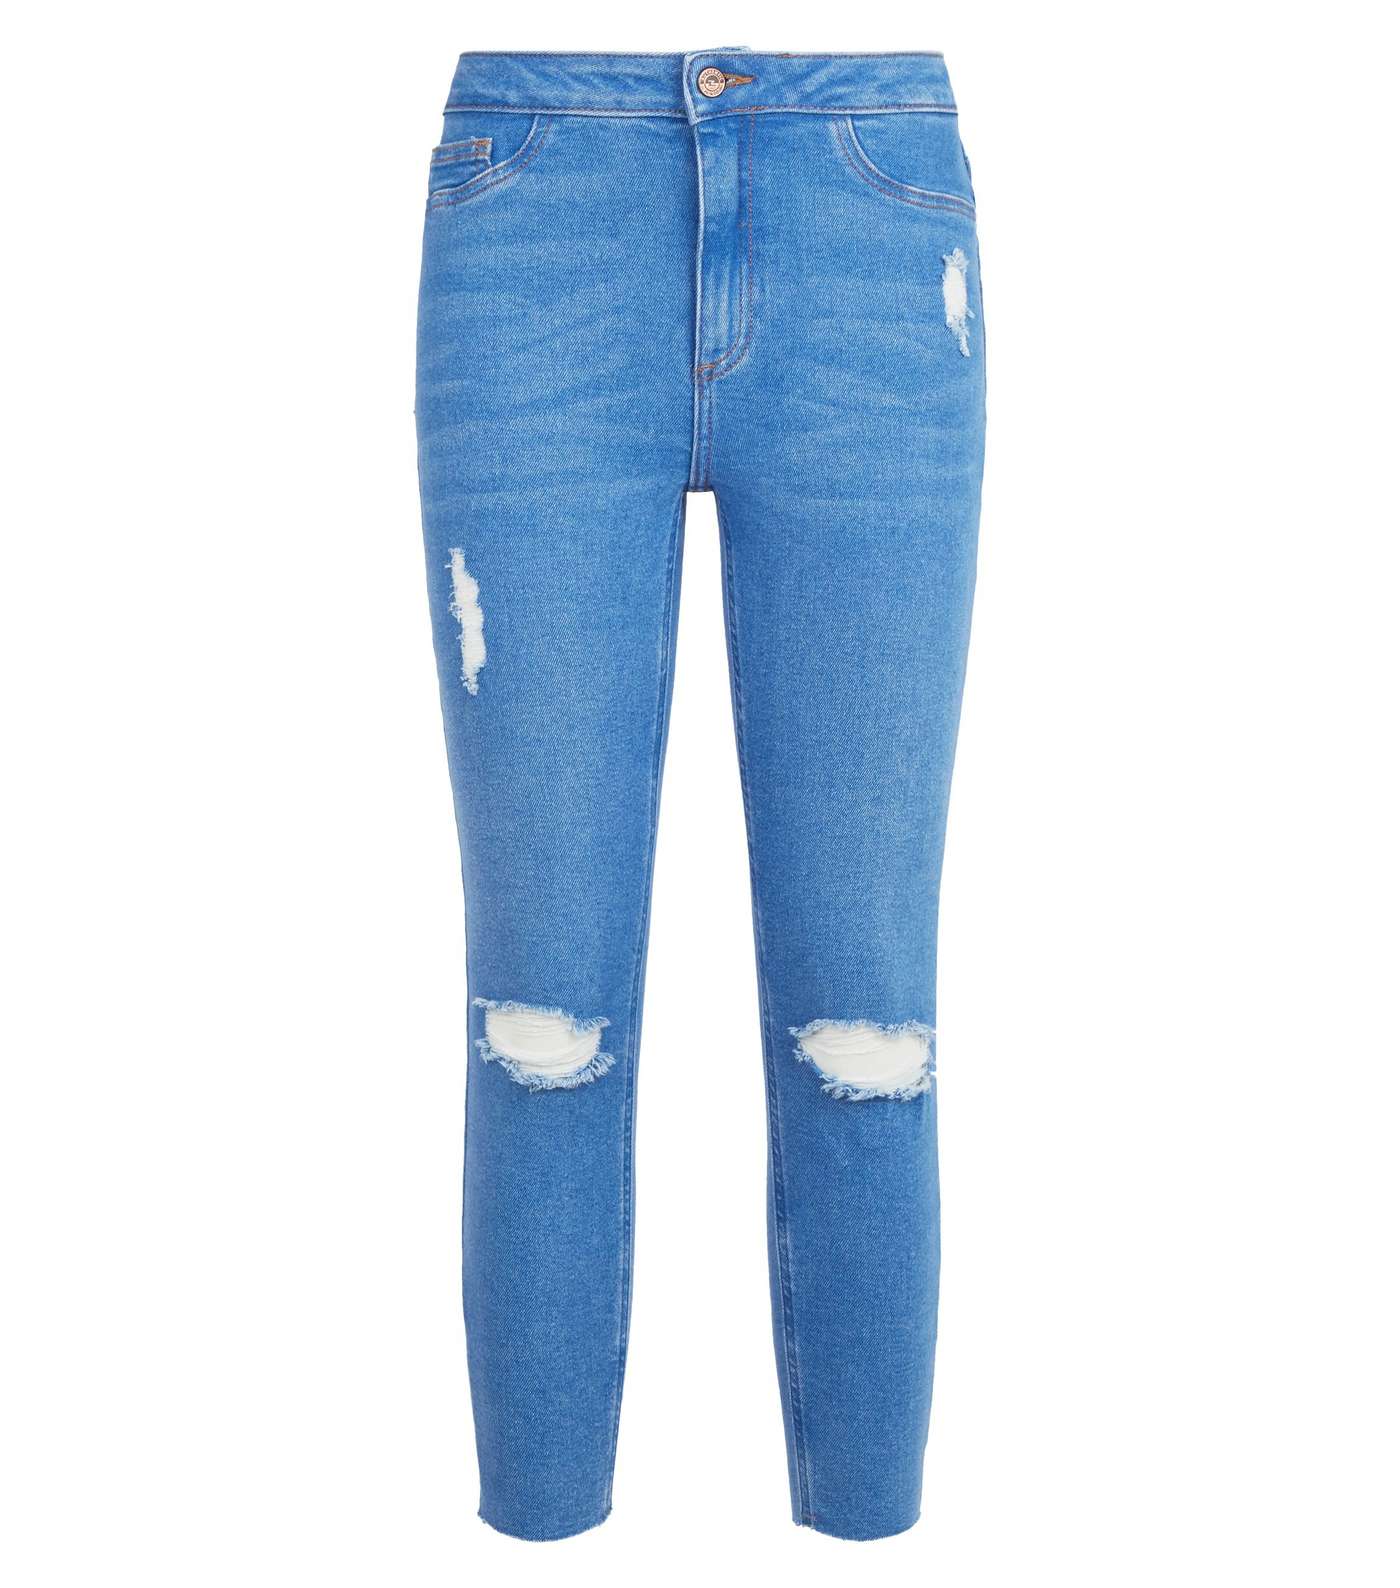 Petite Bright Blue High Waist Ripped Skinny Jeans Image 4